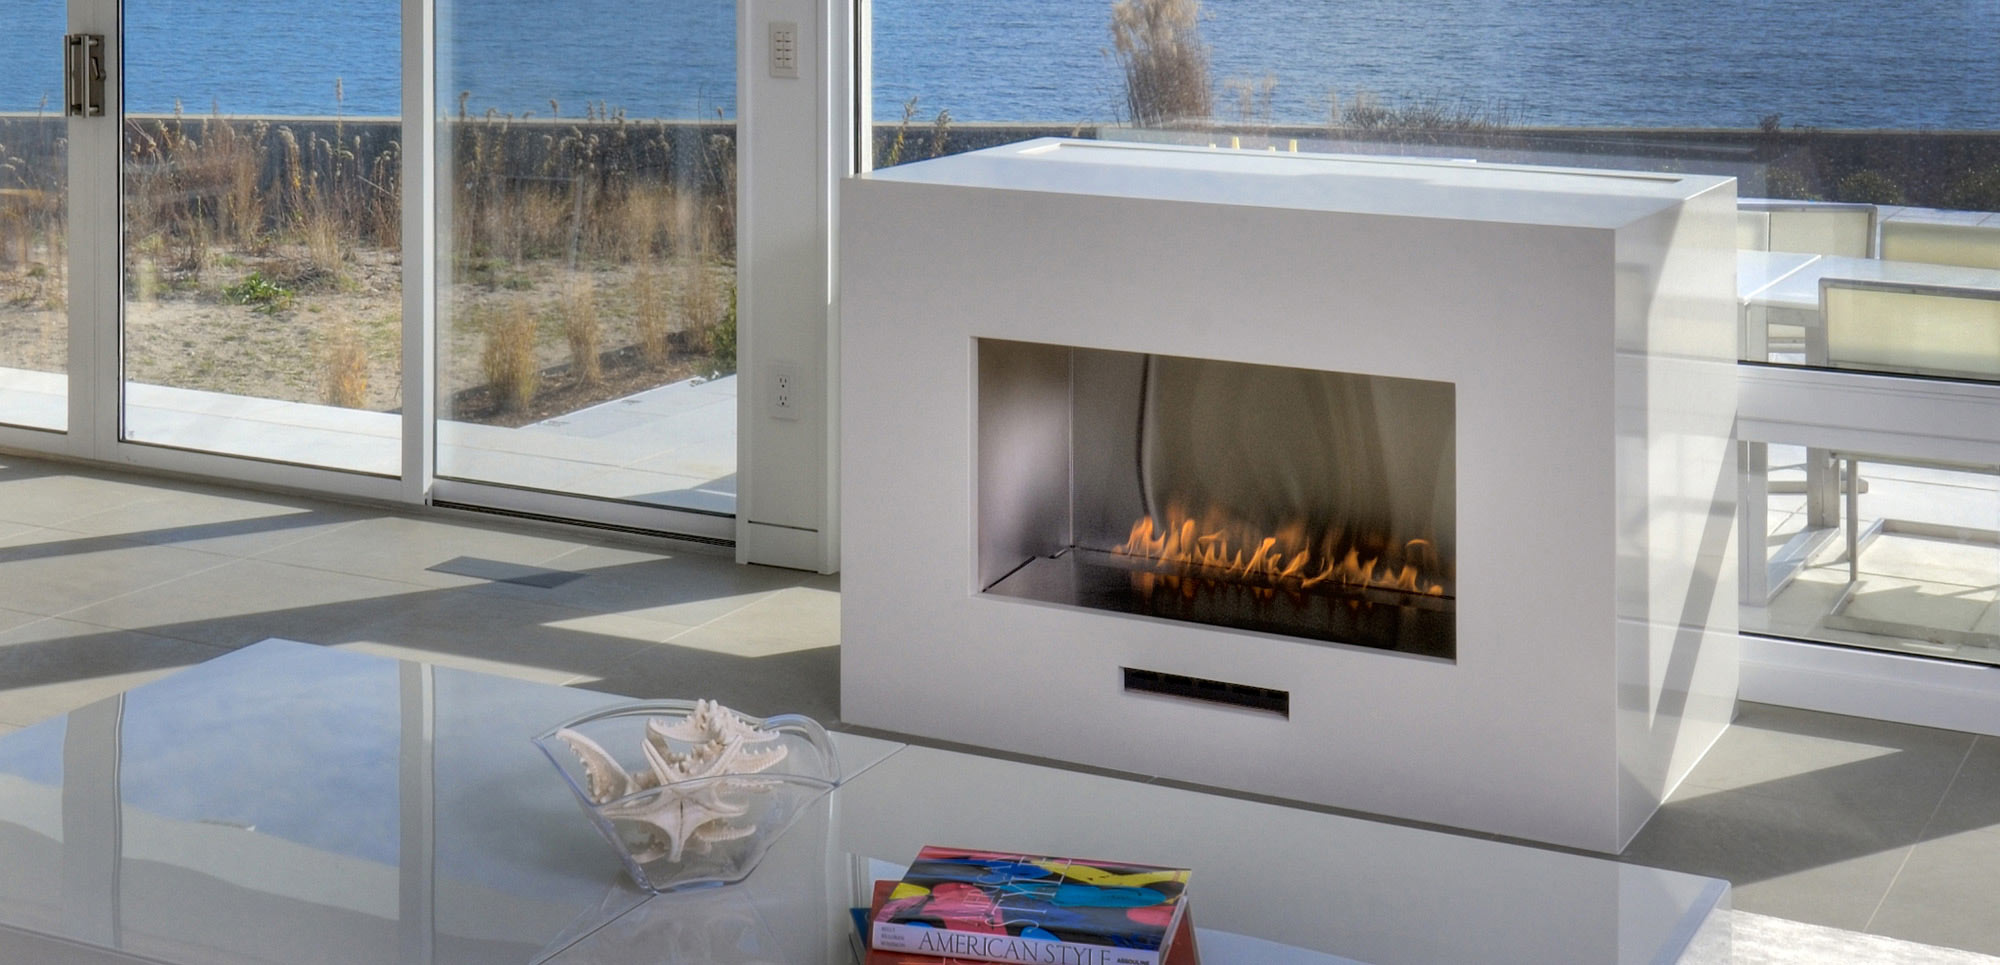 New Gas Fireplace Insert Awesome Spark Modern Fires